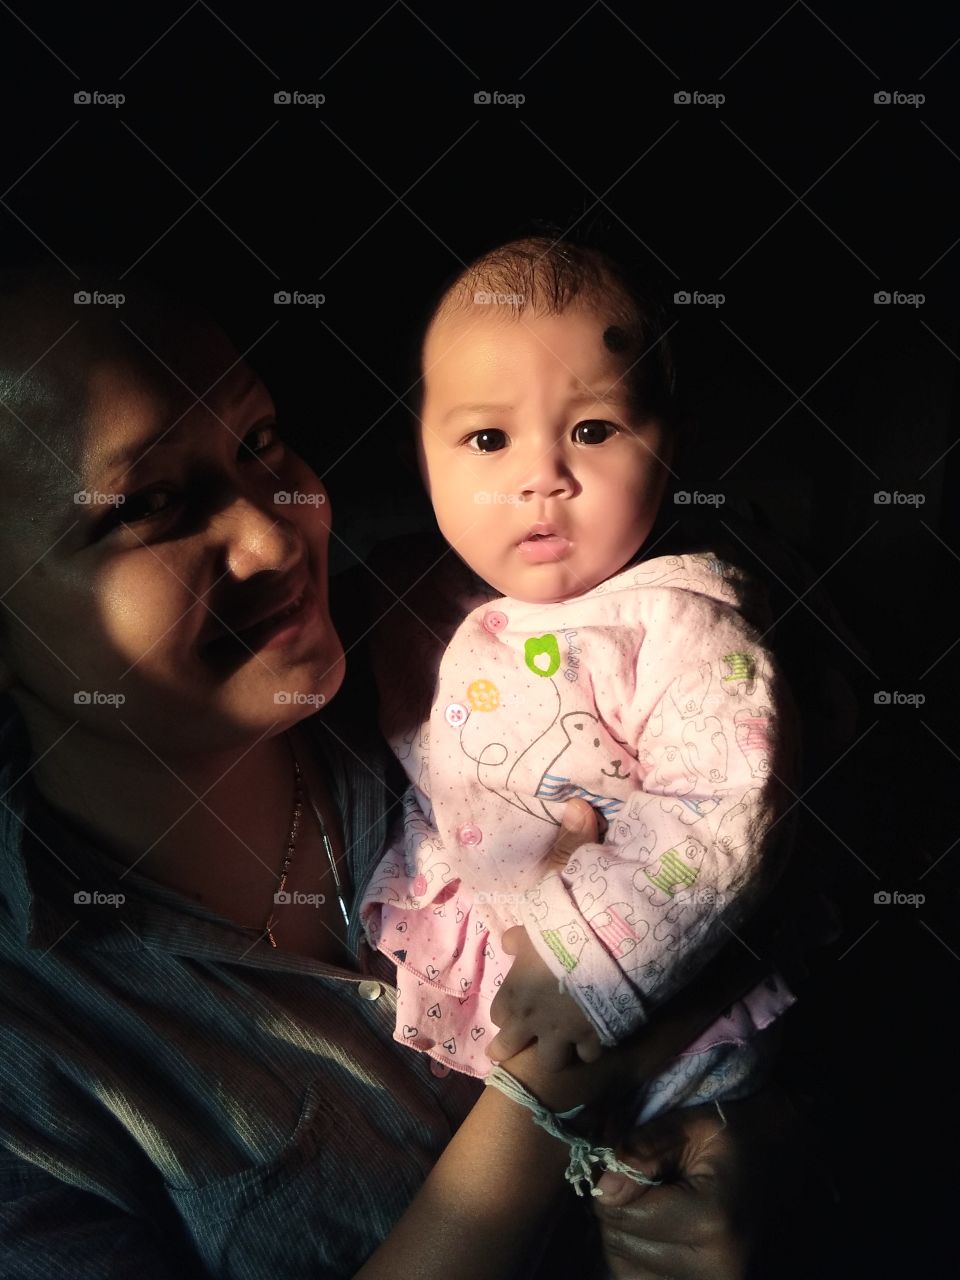 cute baby in a dark place with aunty looking cute